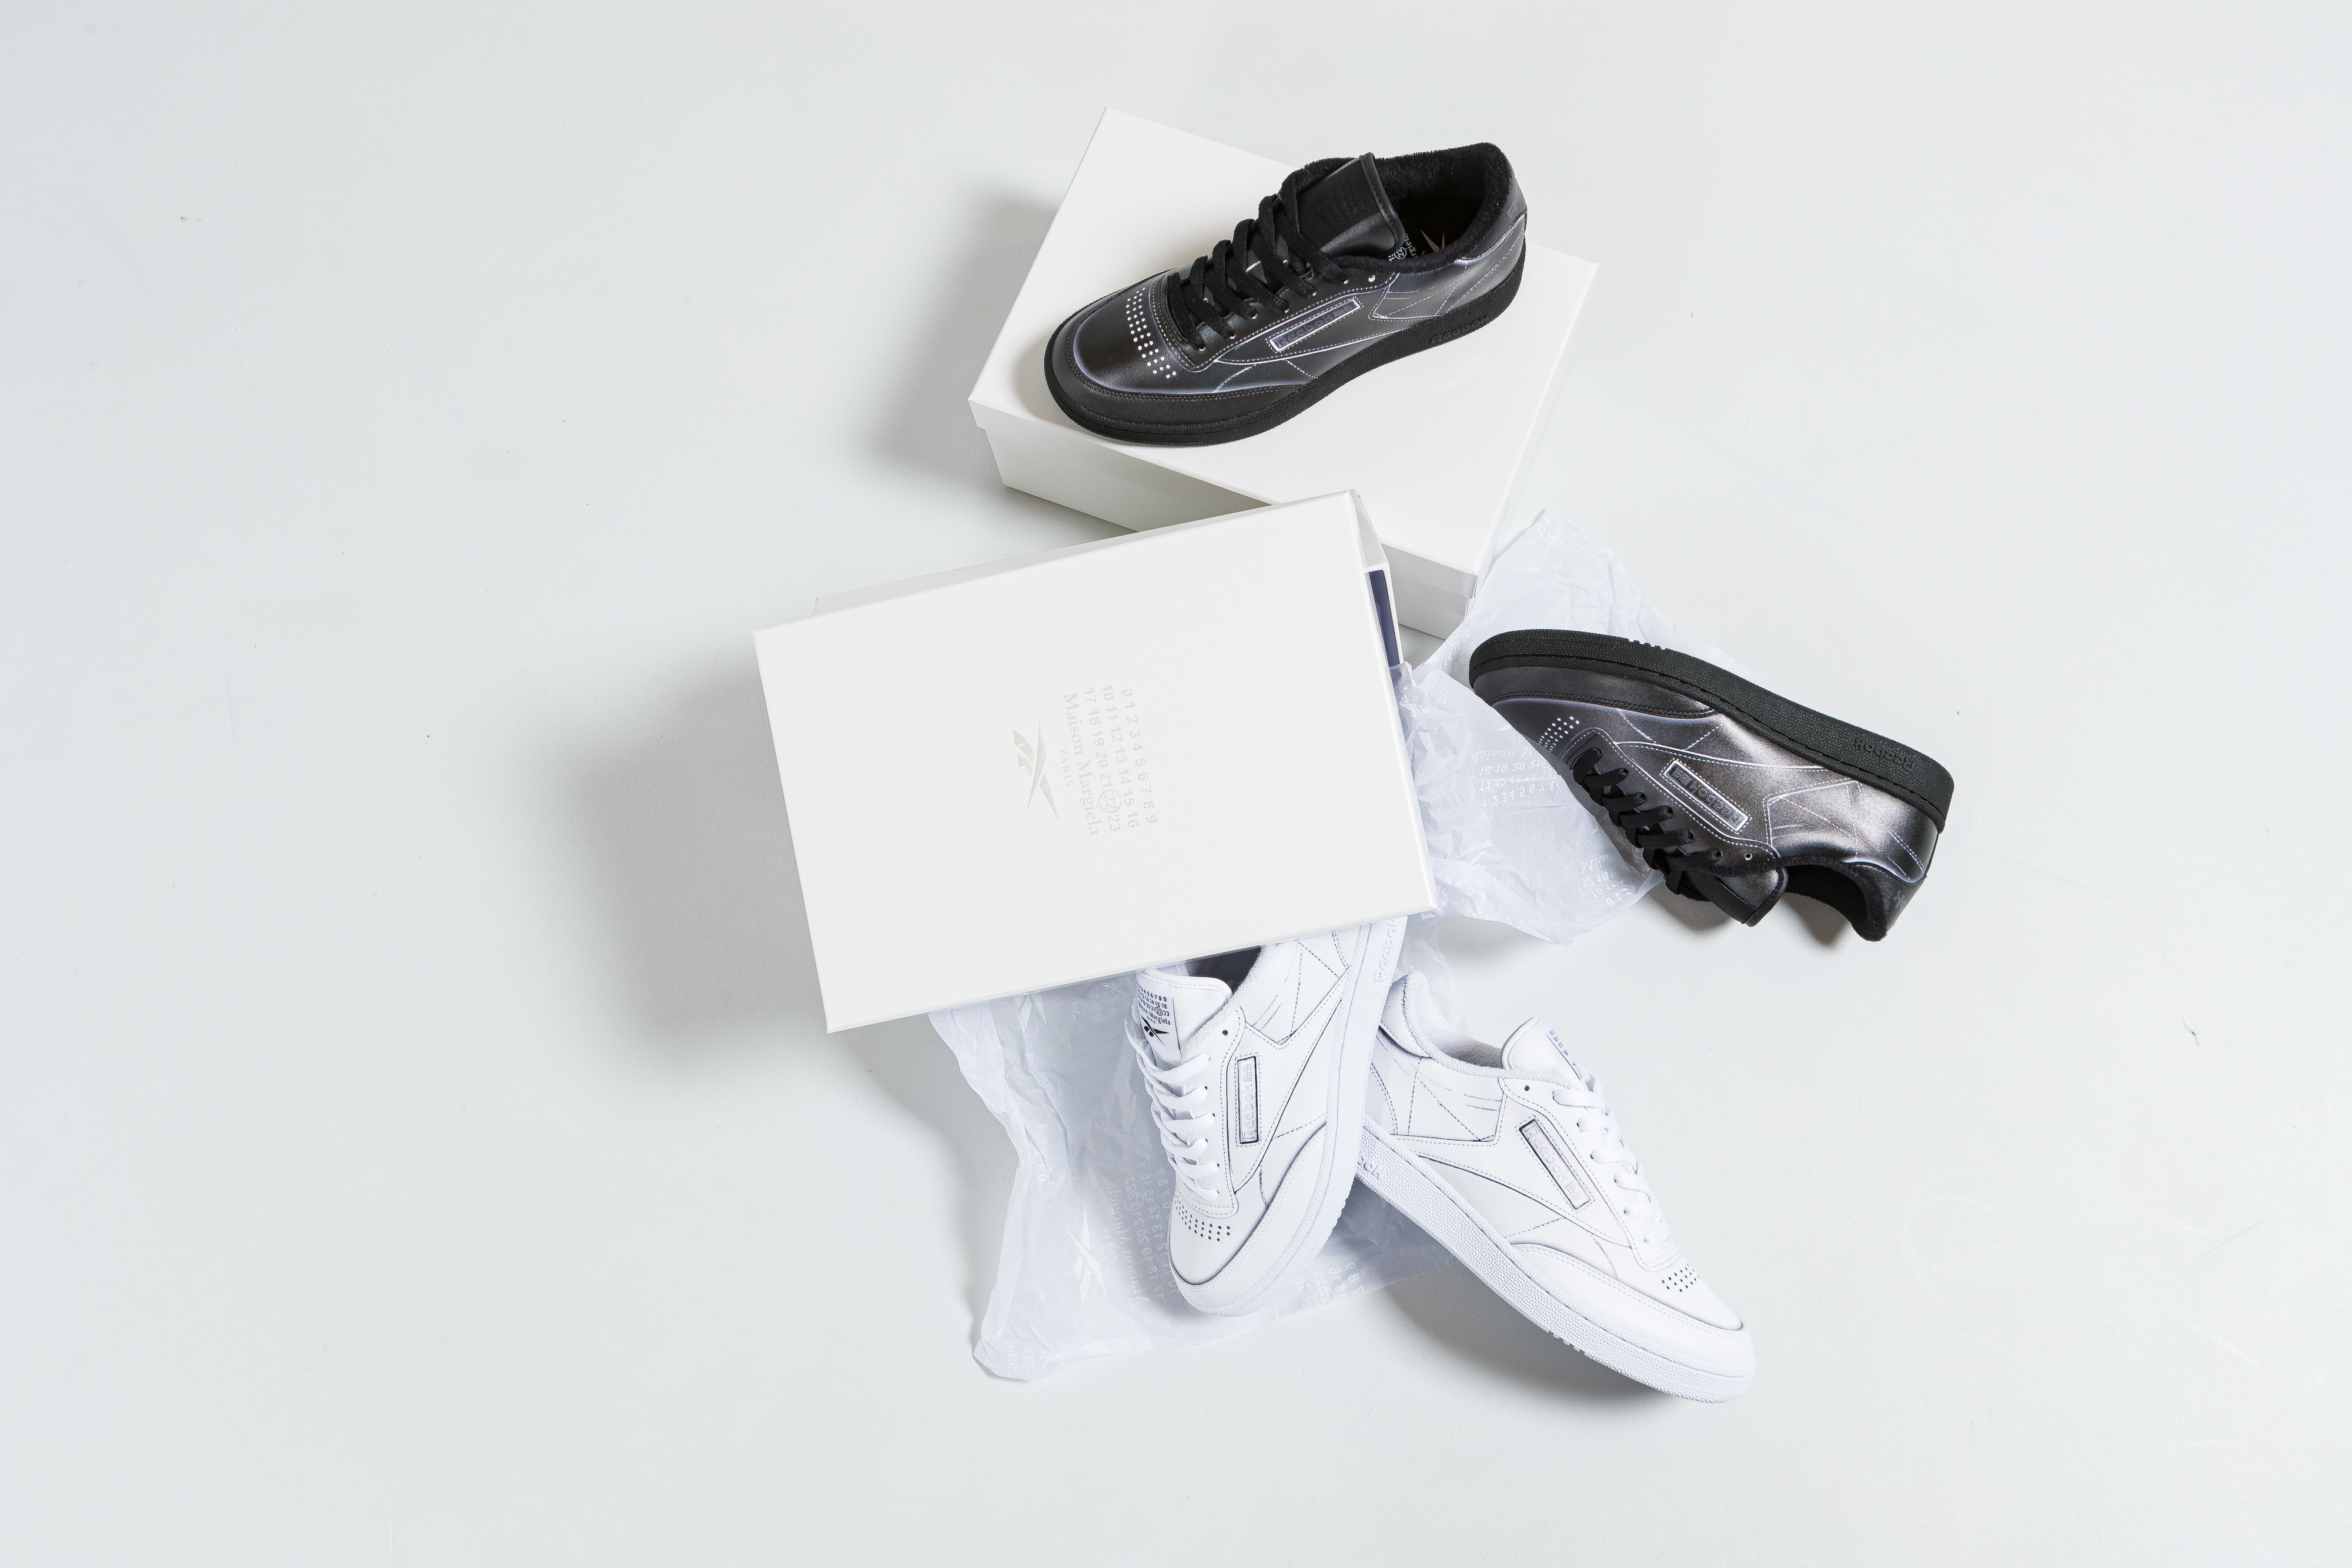 Up There Launches - Reebok Classics X Maison Martin Margiela Project 0 CC